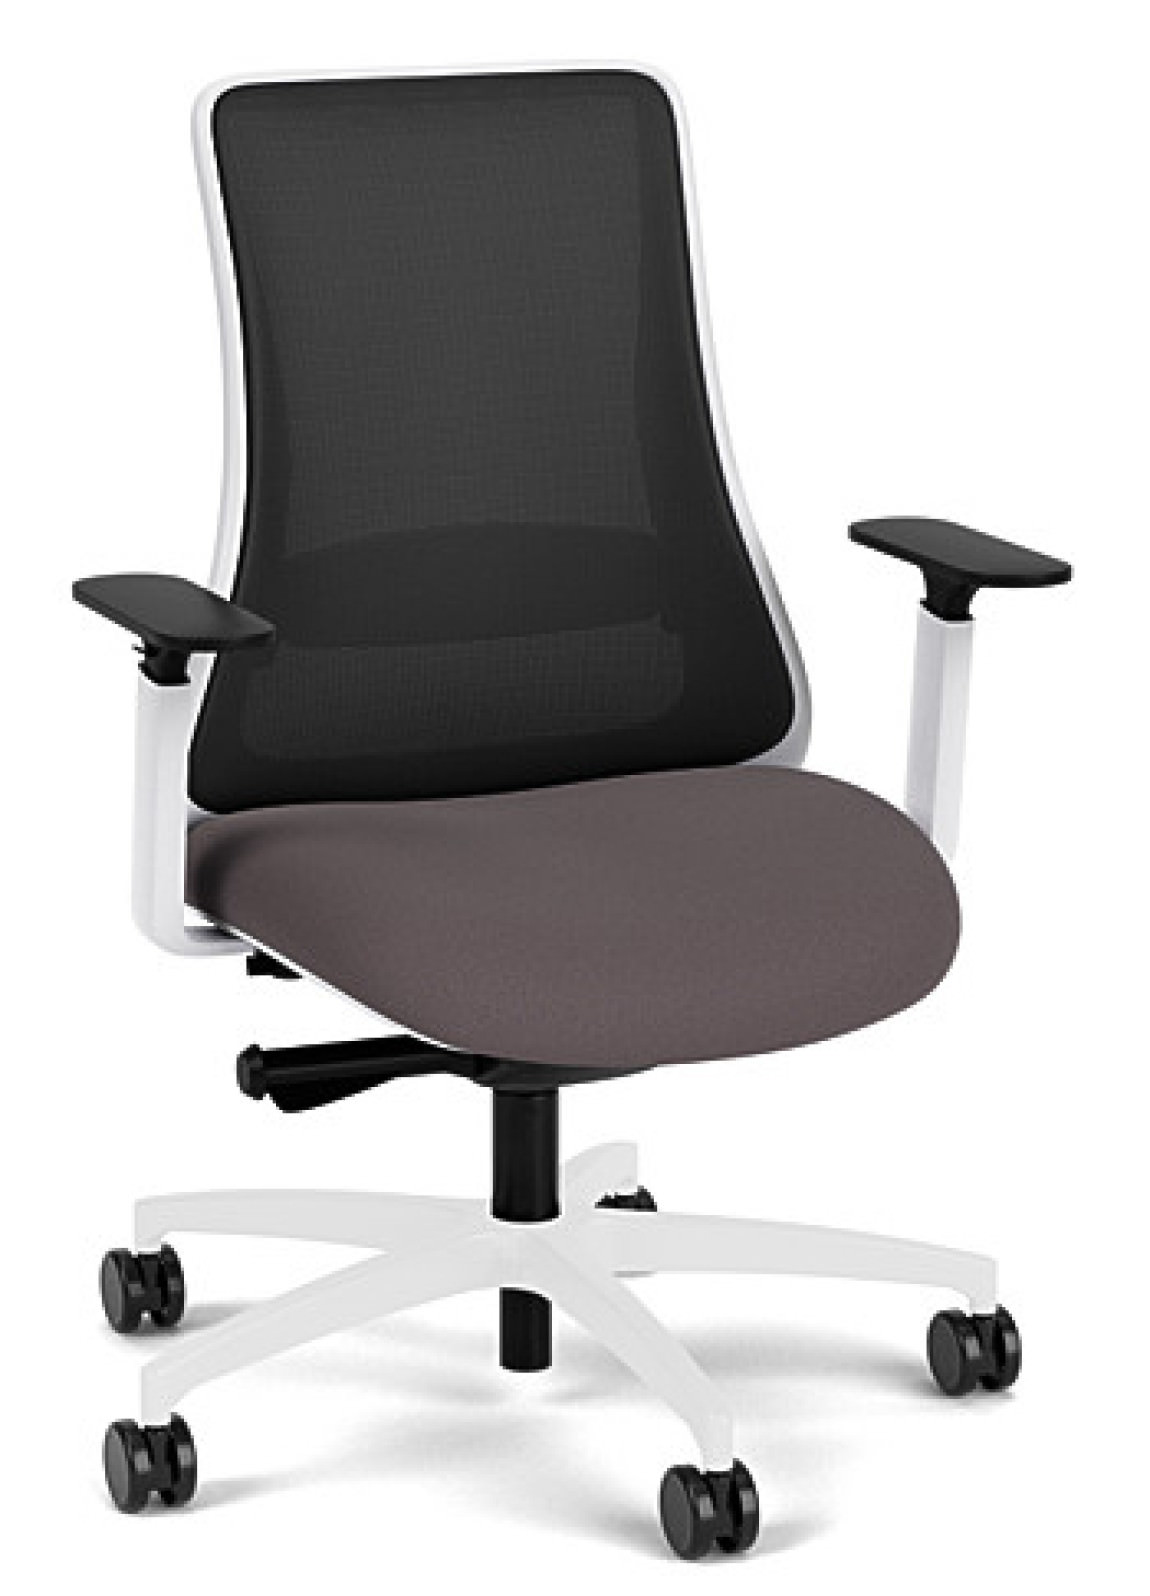 Ergonomic Mesh Back Chair with Lumbar Support